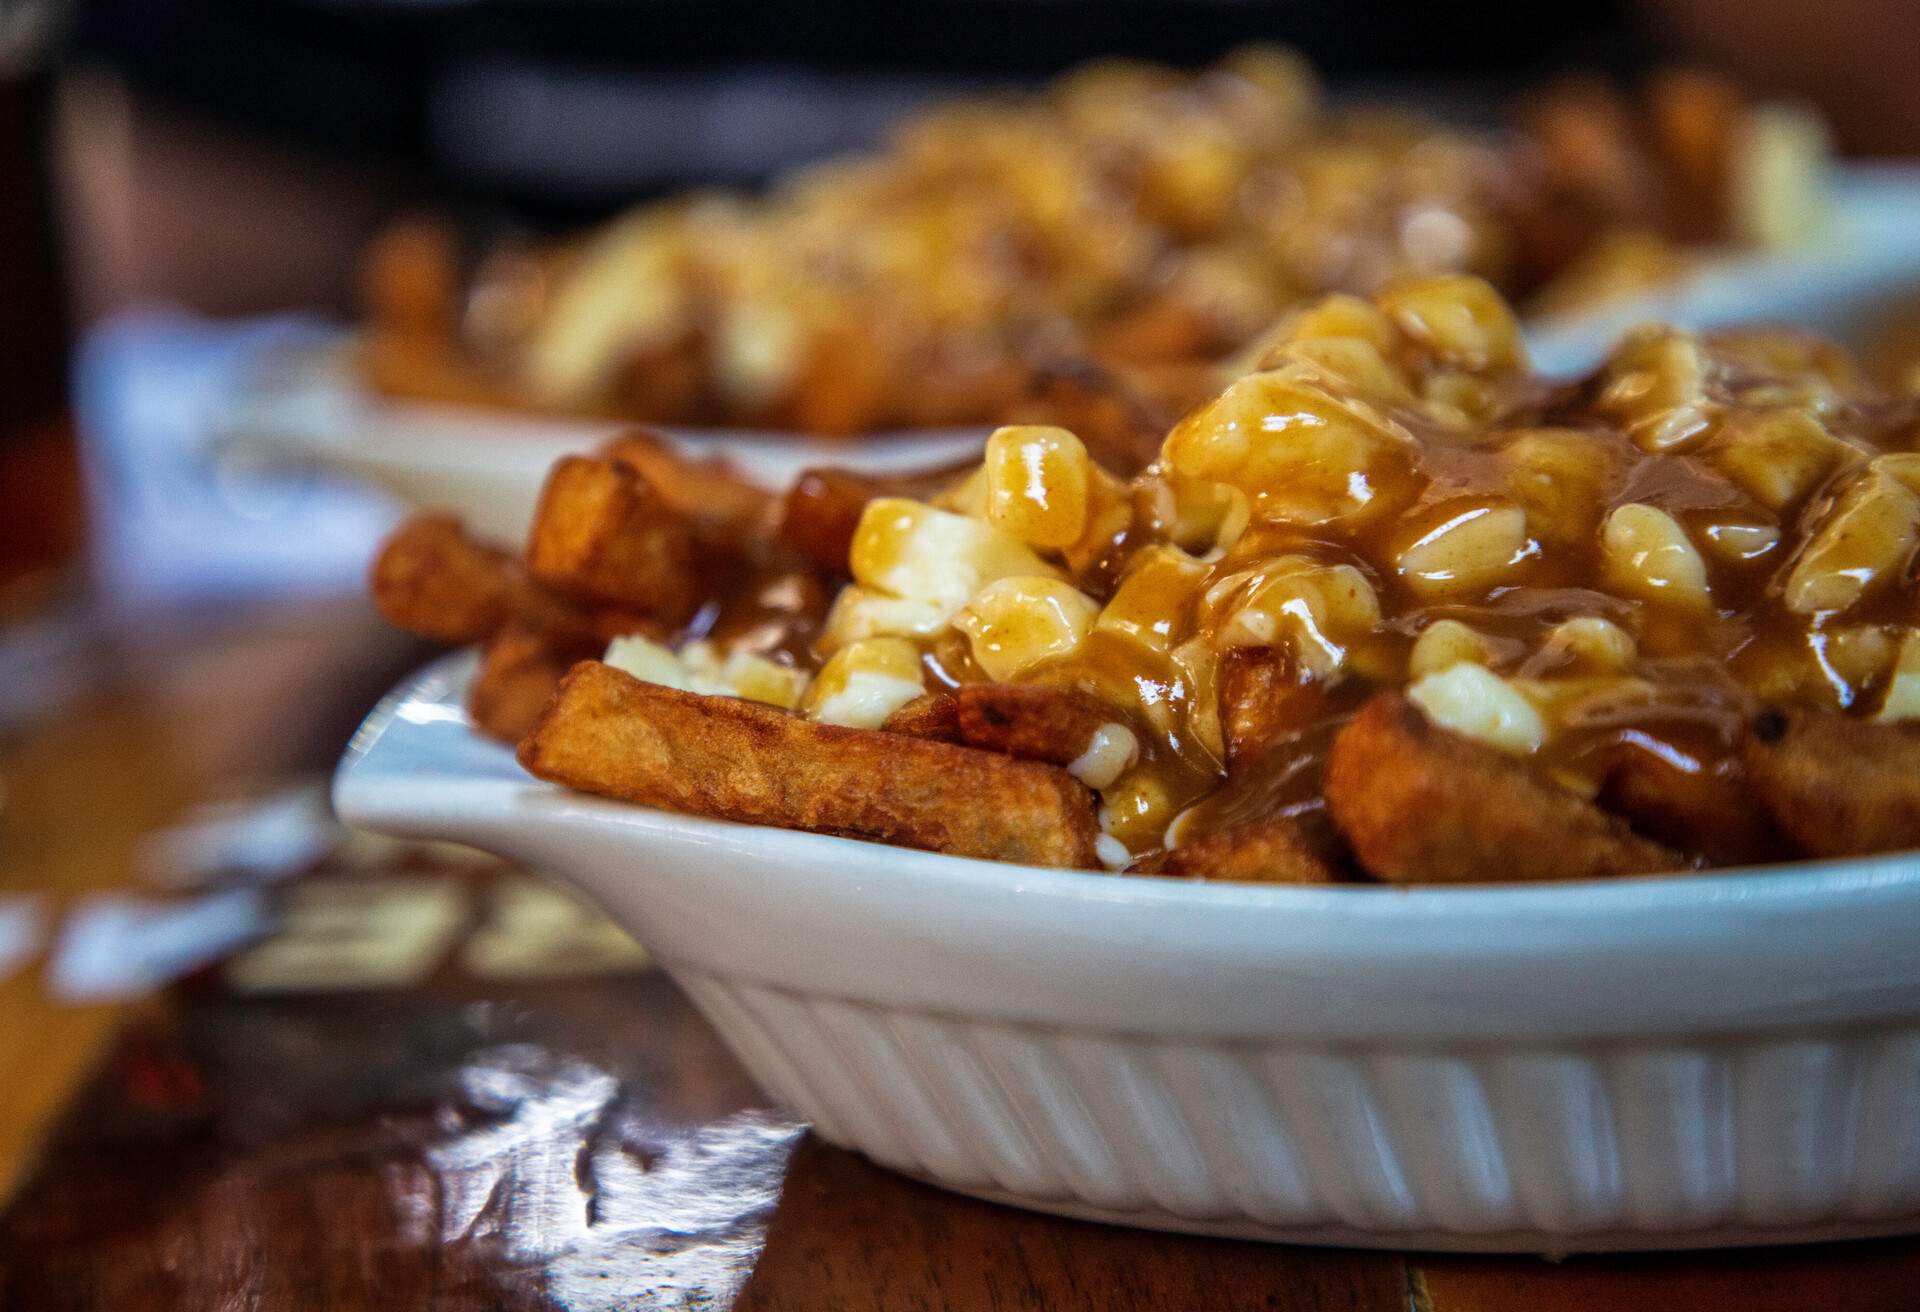 Tasty food image, close up image of 2 dishes of poutine